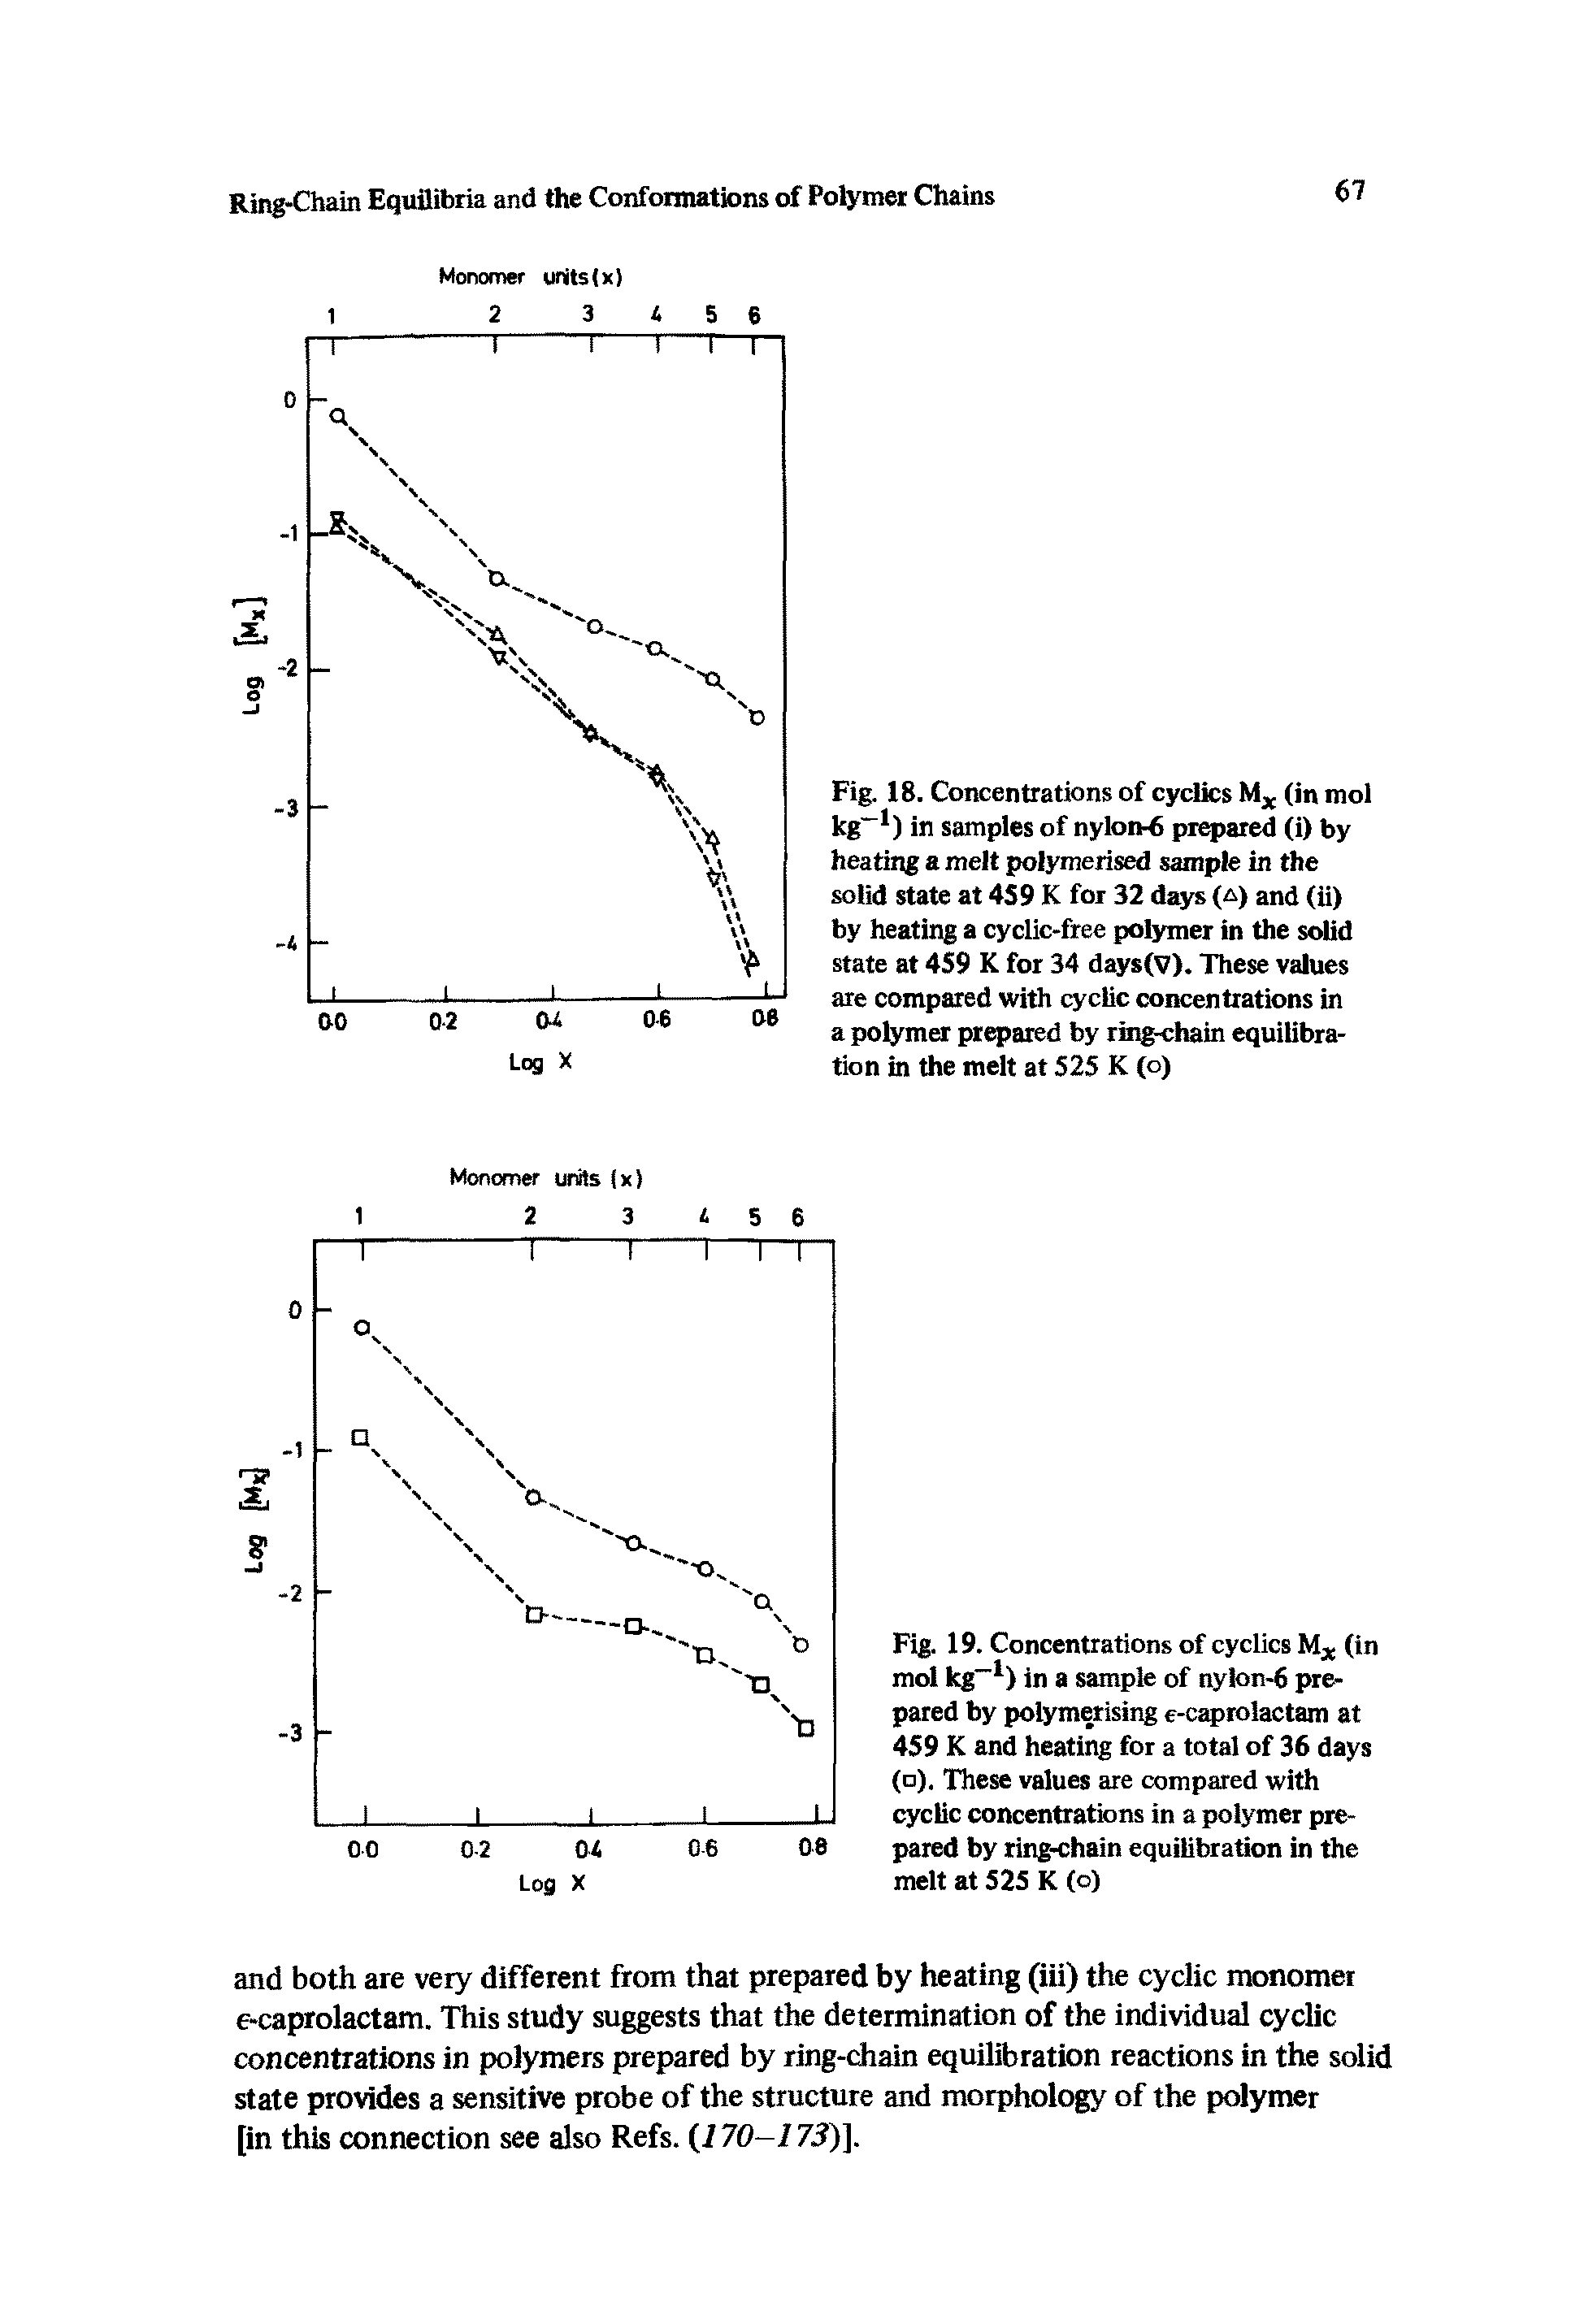 Fig. 18. Concentrations of cyclics (in mol kg ) in samples of nylonrb prepared (i) by heating a melt polymerised sample in the solid state at 459 K for 32 days (a) and (ii) by heating a cyclic-free polymer in the solid state at 459 K for 34 days(V). These values are compared with cyclic concentrations in a polymer prepared by ring-chain equilibration in the melt at 525 K (o)...